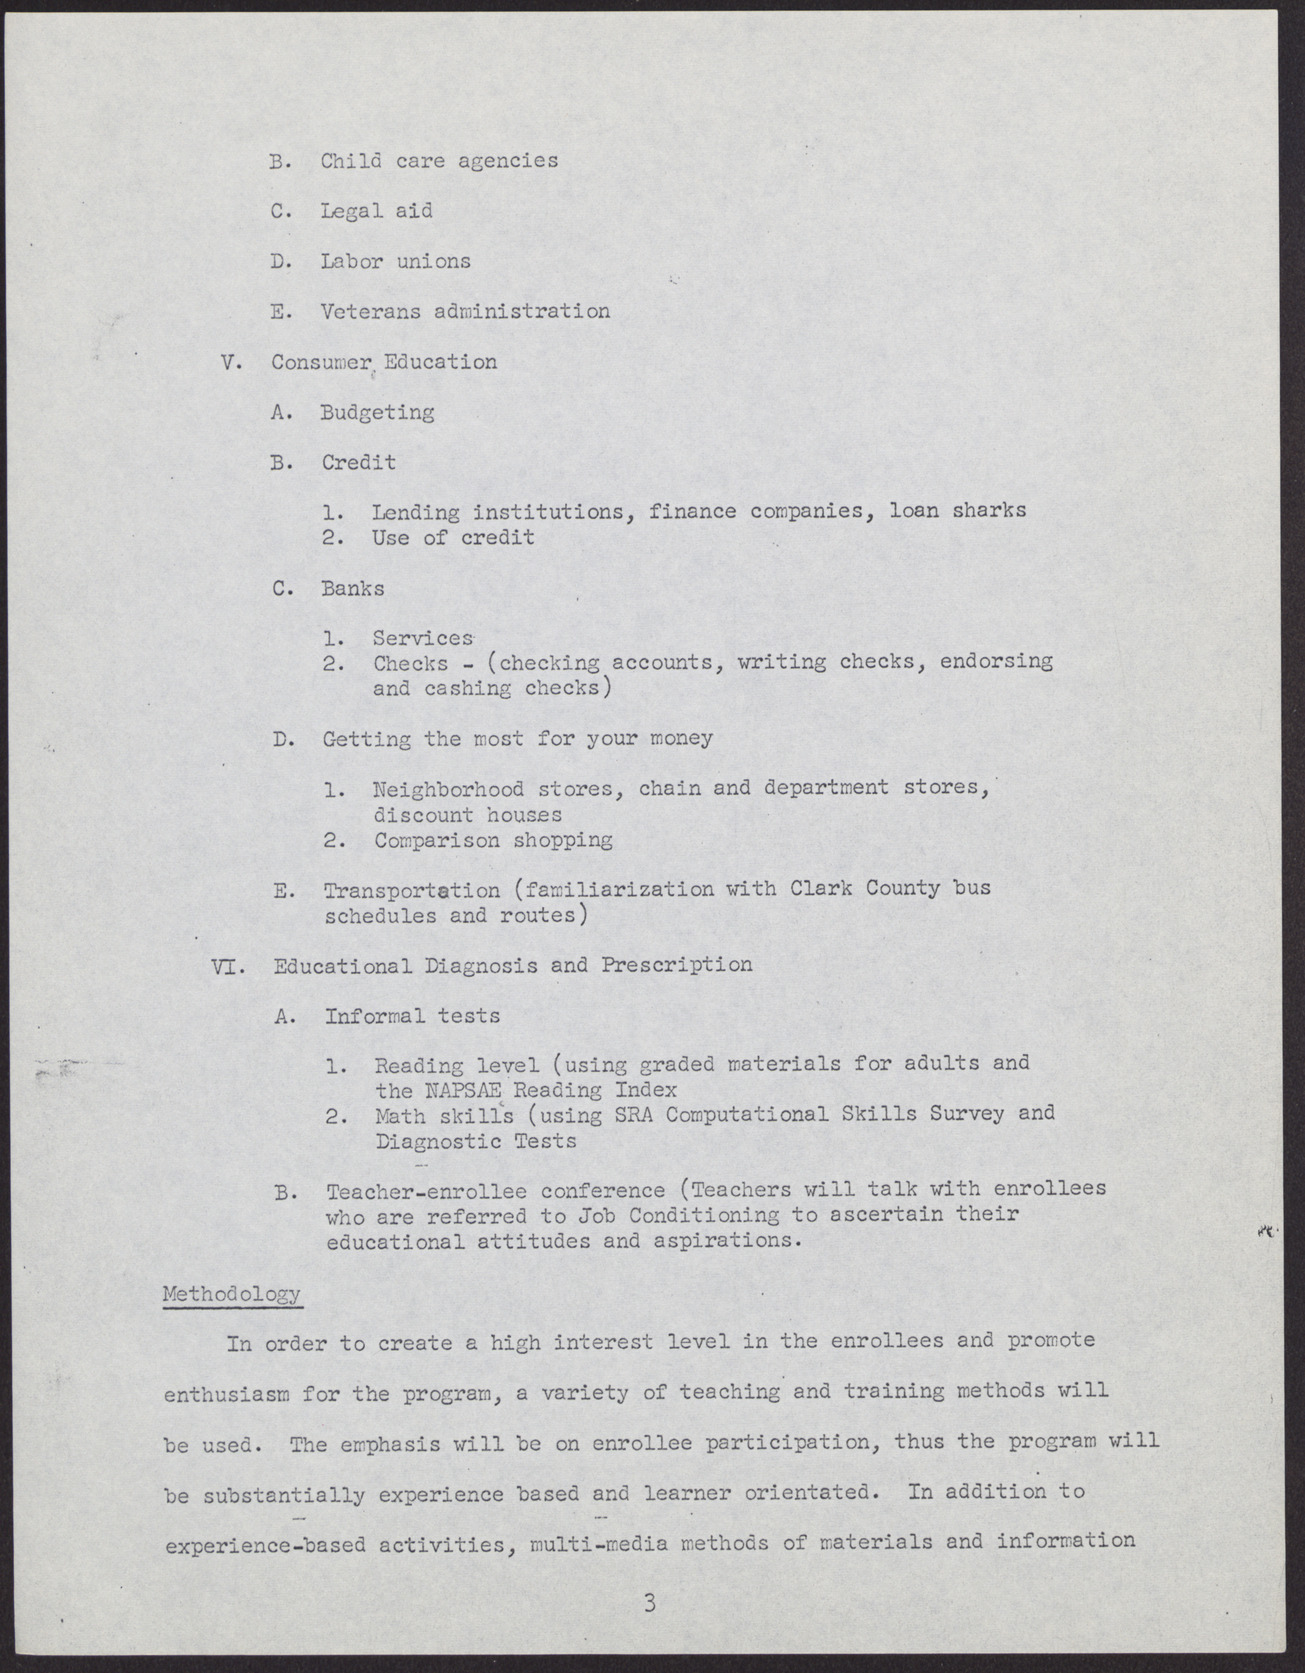 Proposal to the Clark County, Nevada Concentrated Employment Program (21 pages, missing some pages/sections listed in its table of contents), July 2, 1968, page 7